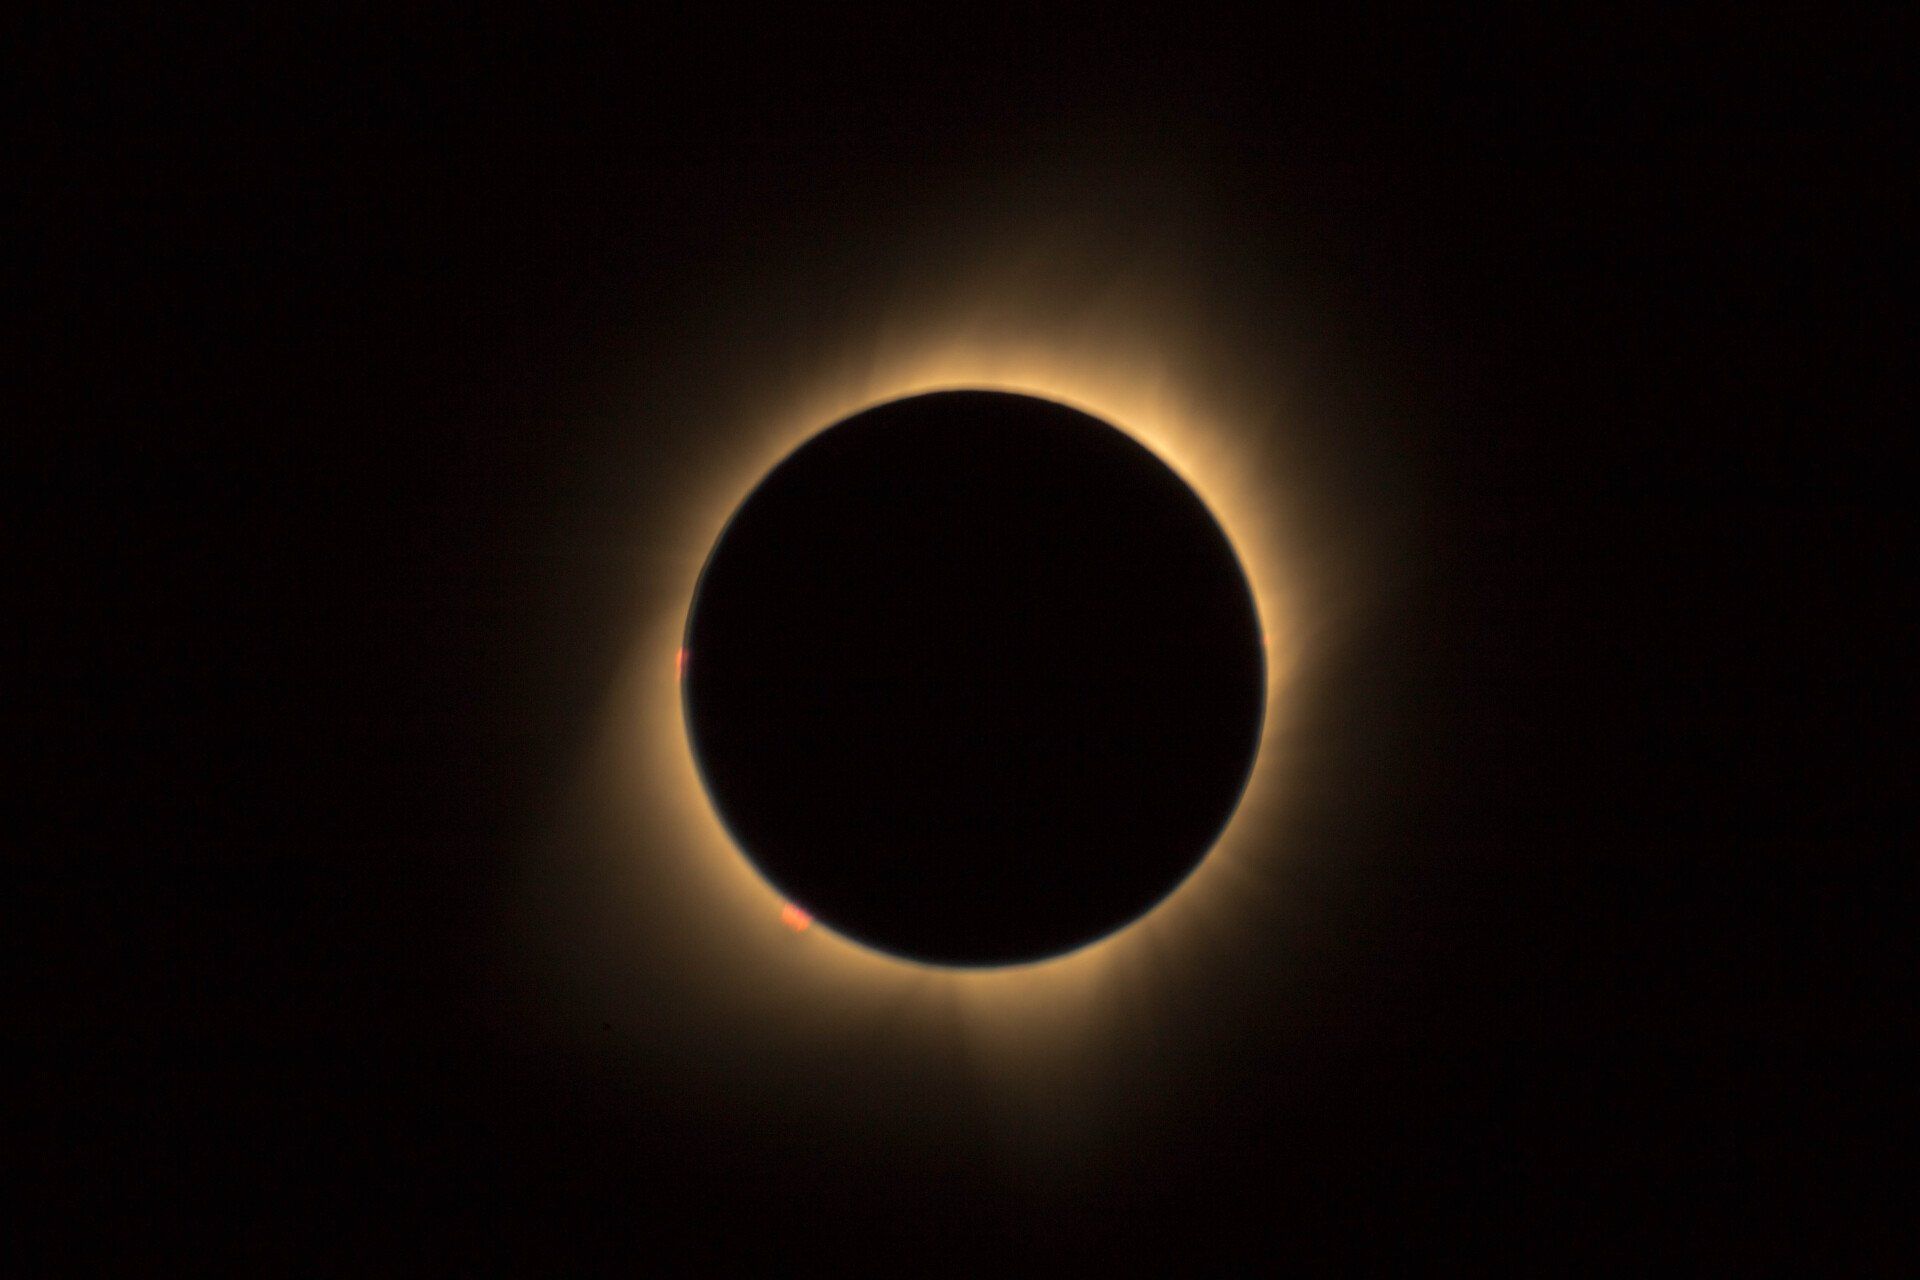 The moon is covering the sun during a total eclipse.